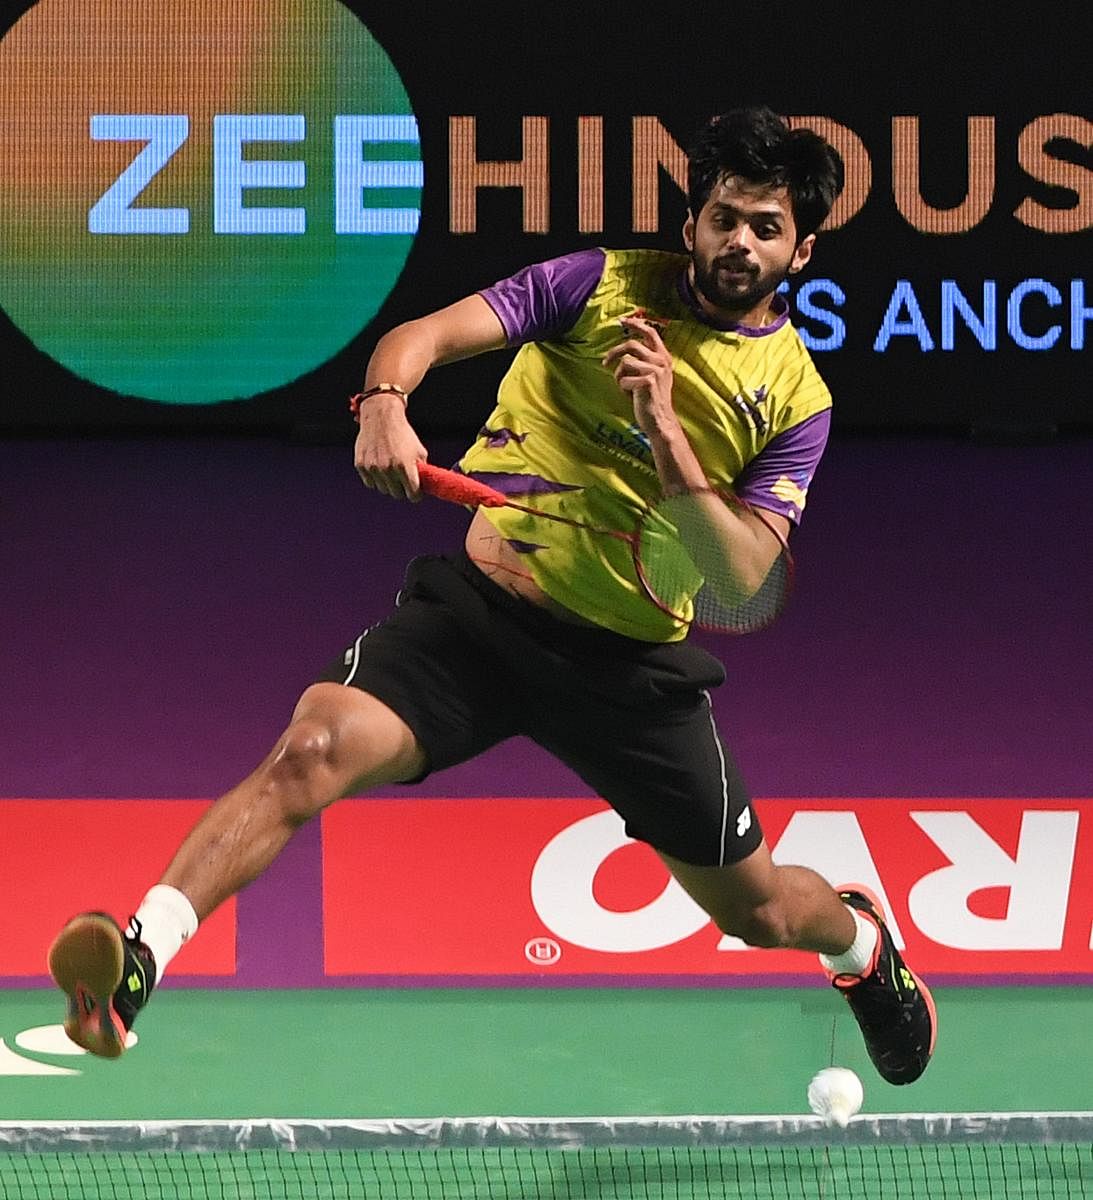 India's challenge at the Japan Open-ended with Sai Praneeth's loss to top seed and home hero Kento Momota in the semifinals here on Saturday. (DH Photo)